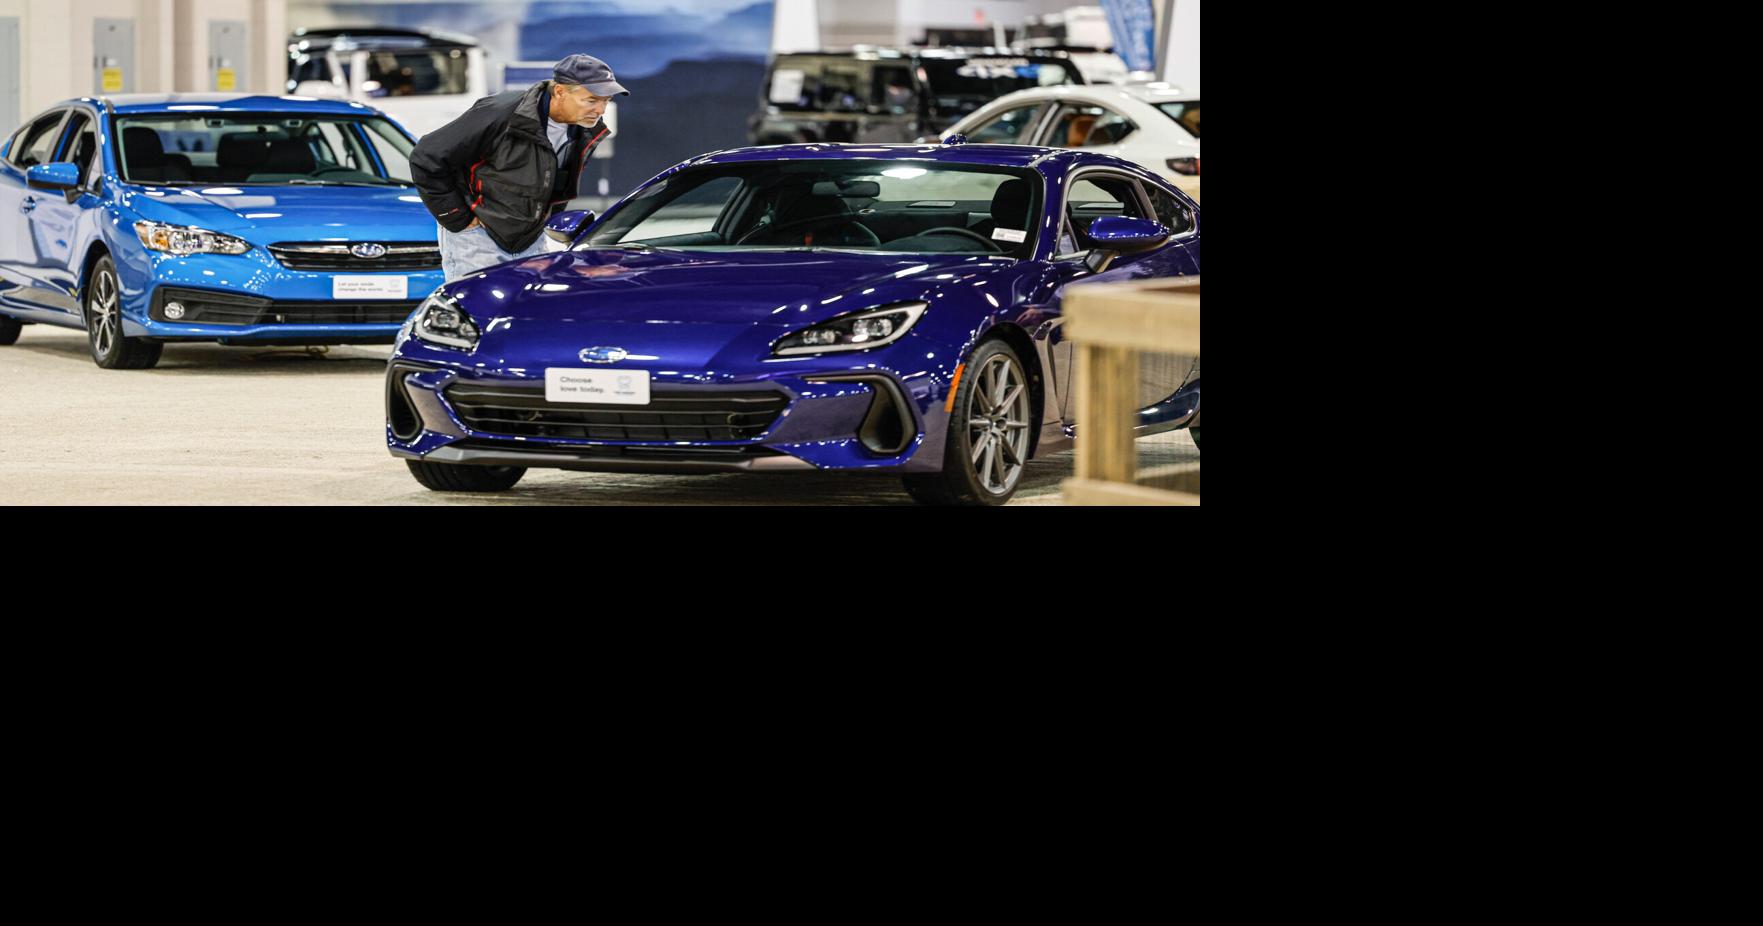 Virginia Auto Show returns with EVs and latest car tech